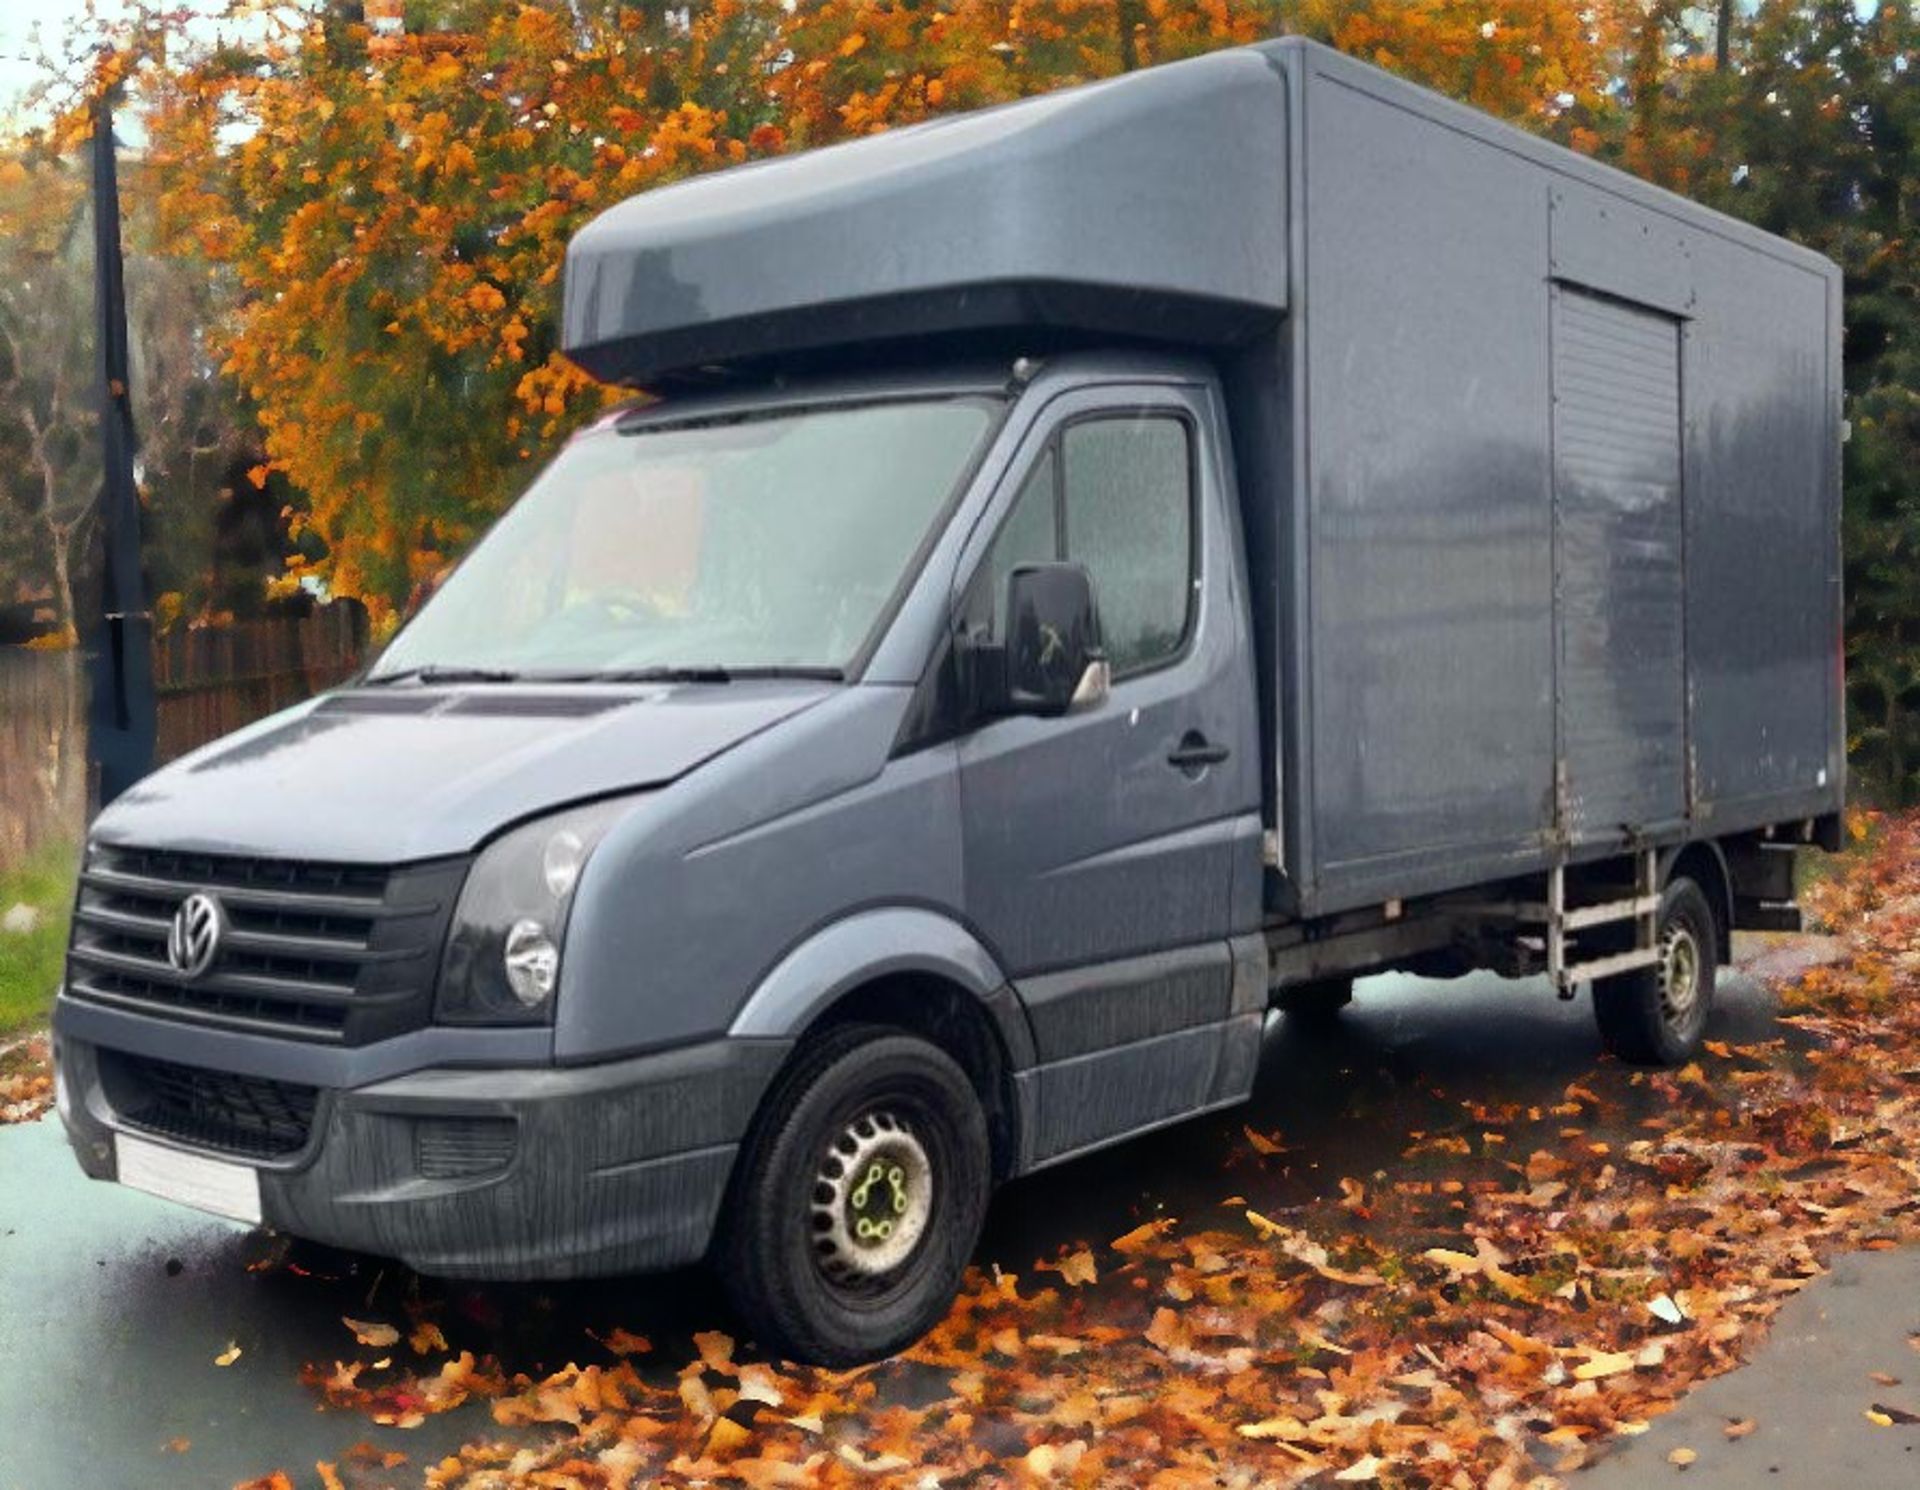 2014 VOLKSWAGEN CRAFTER CR35 TDI LWB LUTON VAN - YOUR RELIABLE MOVING PARTNER